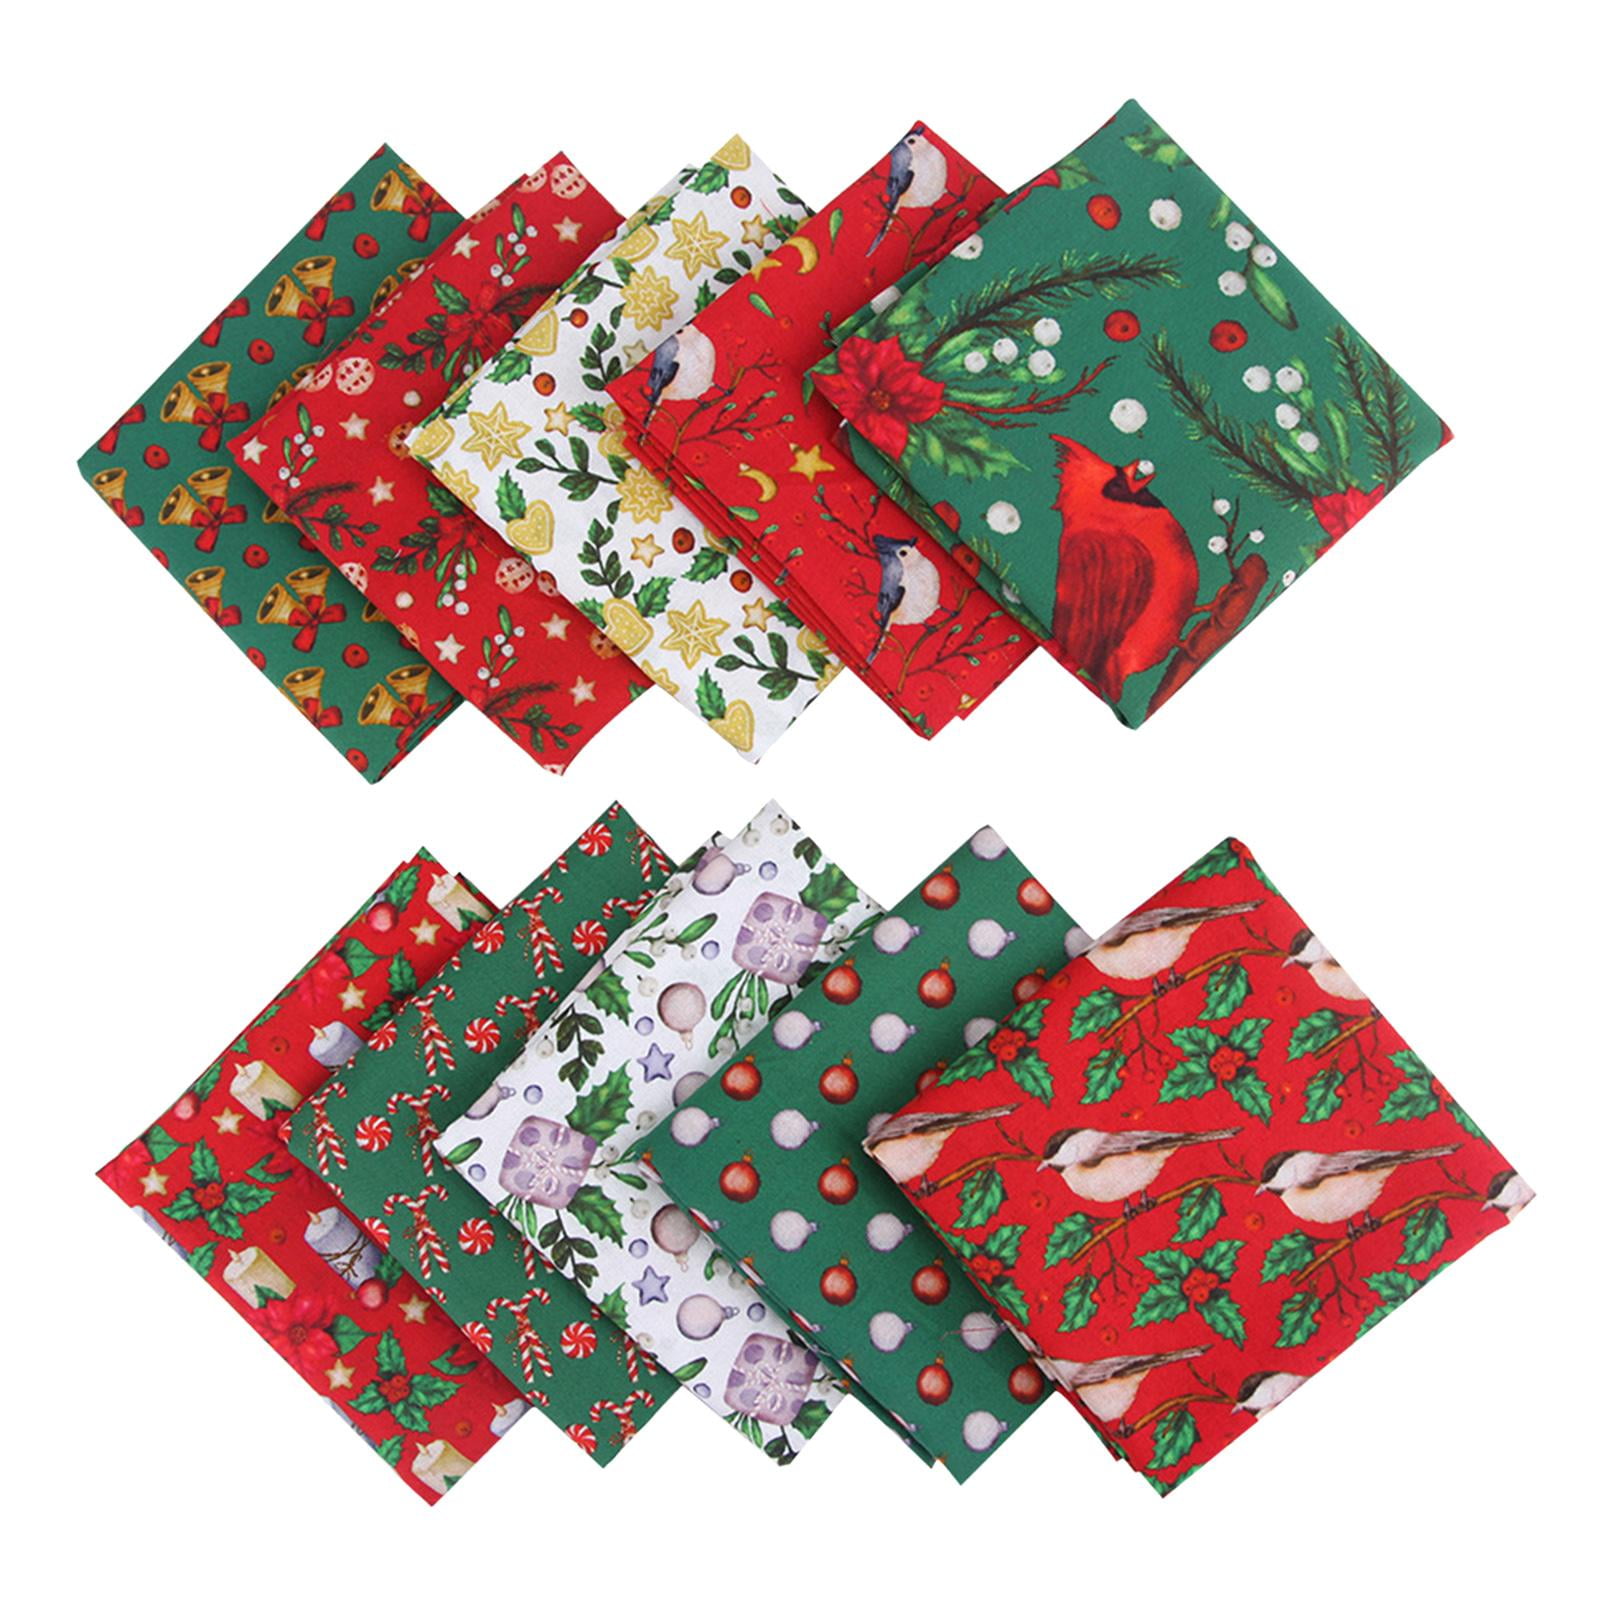 42 Pieces Christmas Fabric Bundles Sewing Quilting Fabric 10 x 10 Inch  Christmas Santa Elk Snowflake Printing Fabric Squares Craft Fabric for